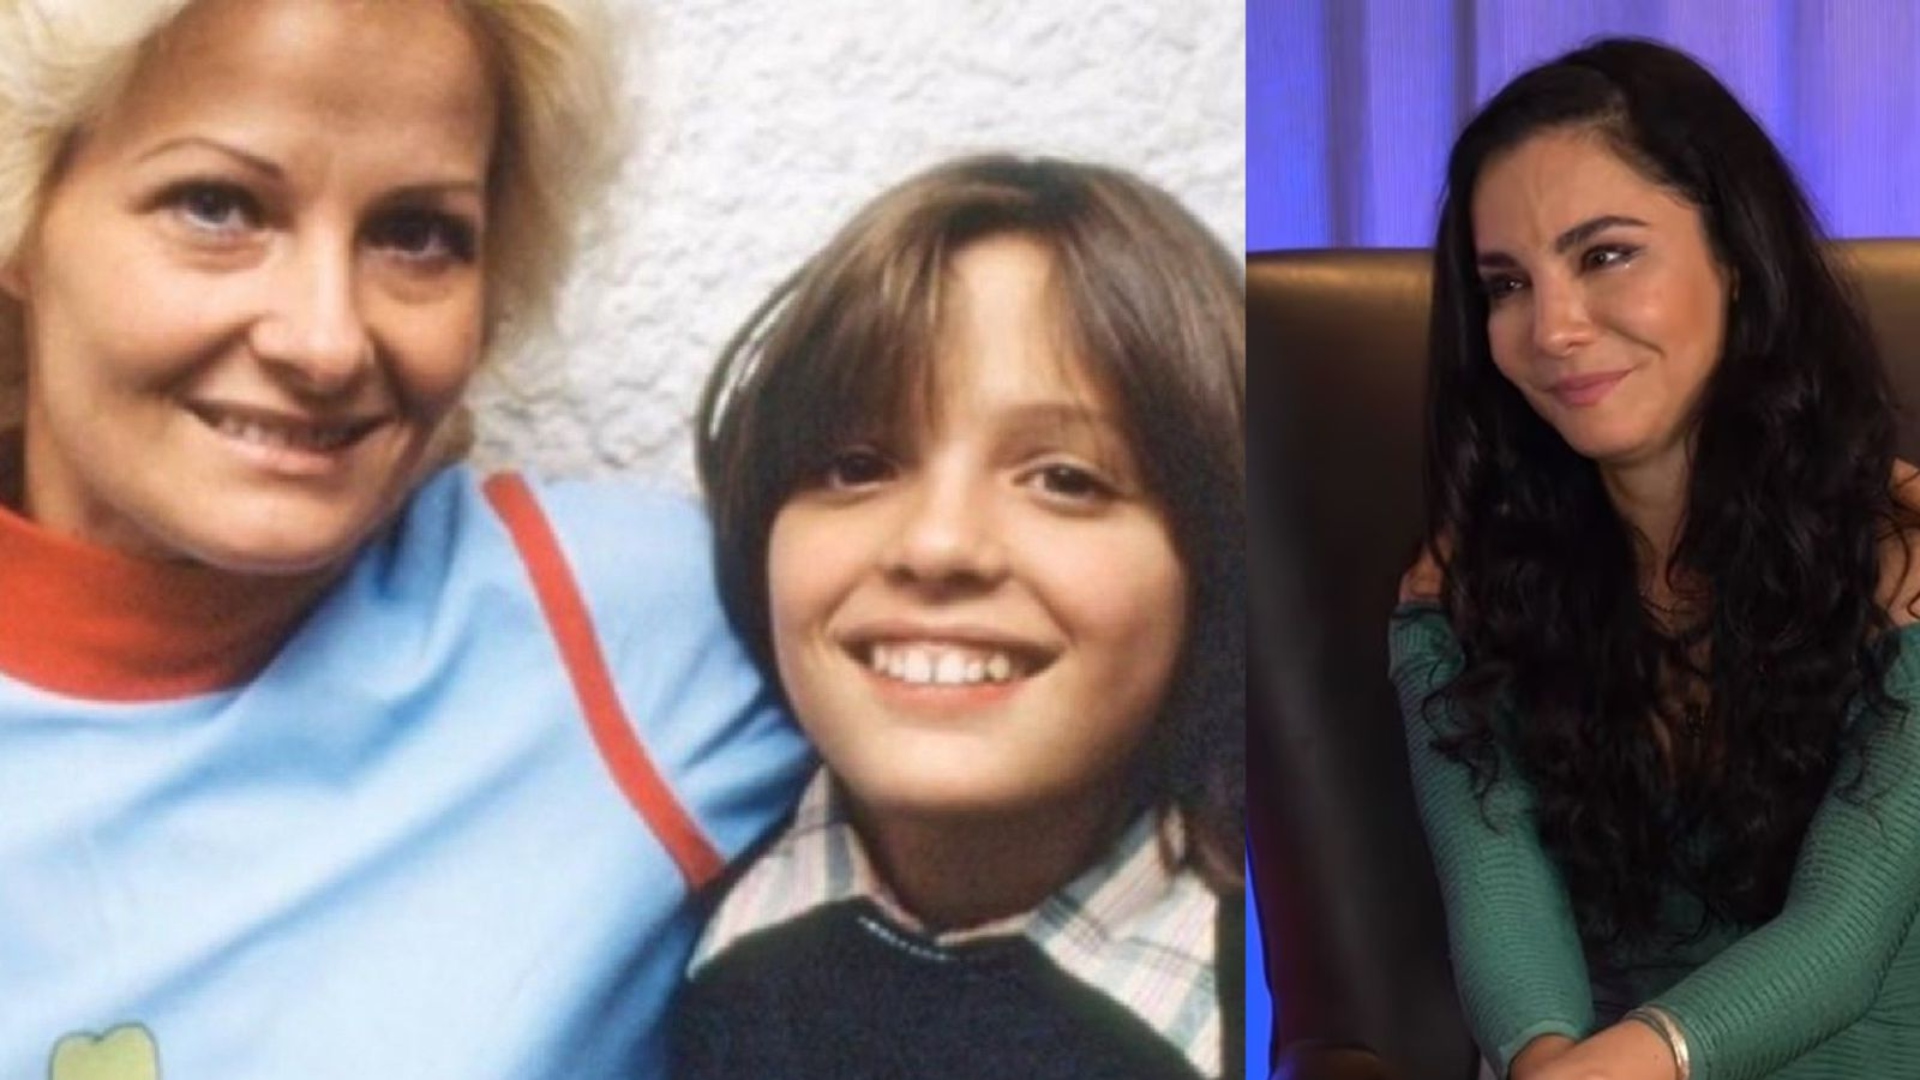 Fans of Martha Higareda asked her about the mystery of Luis Miguel's mother on social networks (Photos: Instagram/@lmxlm/@marthahigareda)